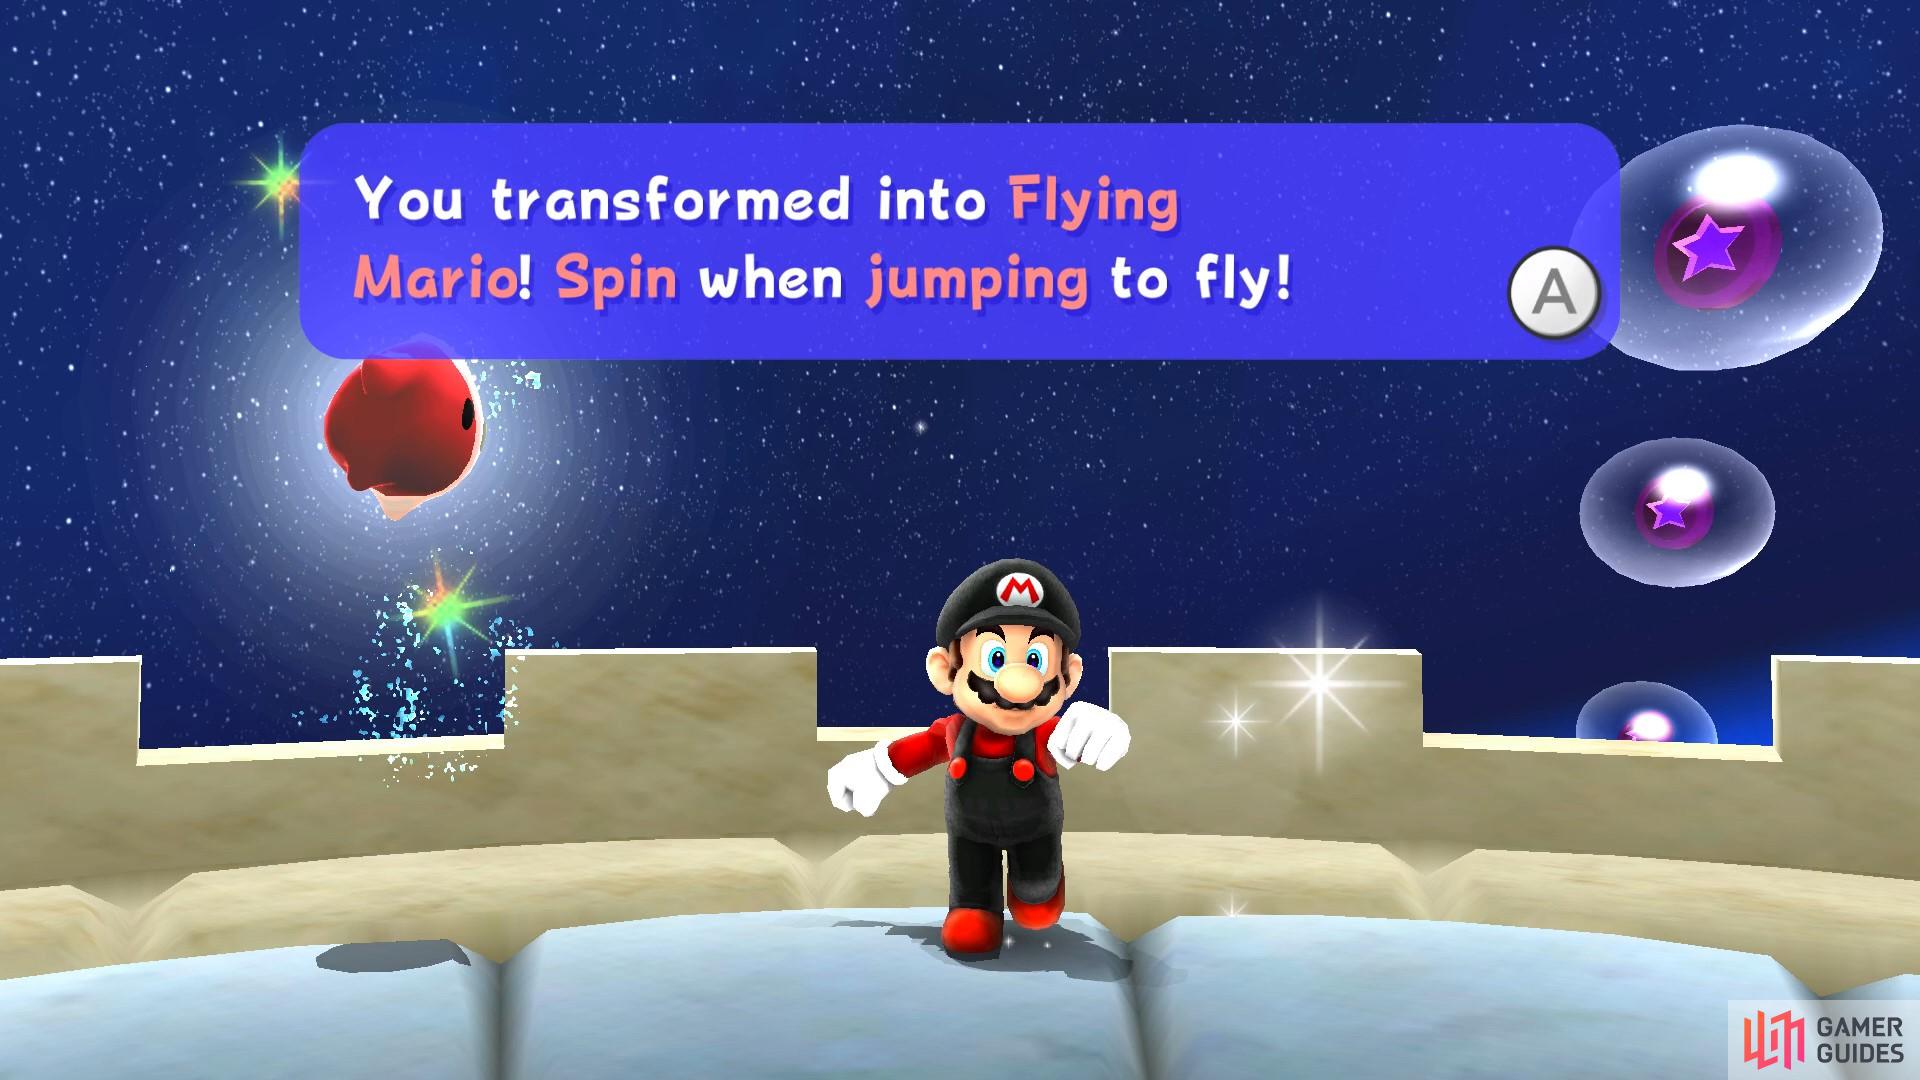 This is your first run in with the red power-up star that allows you to fly!